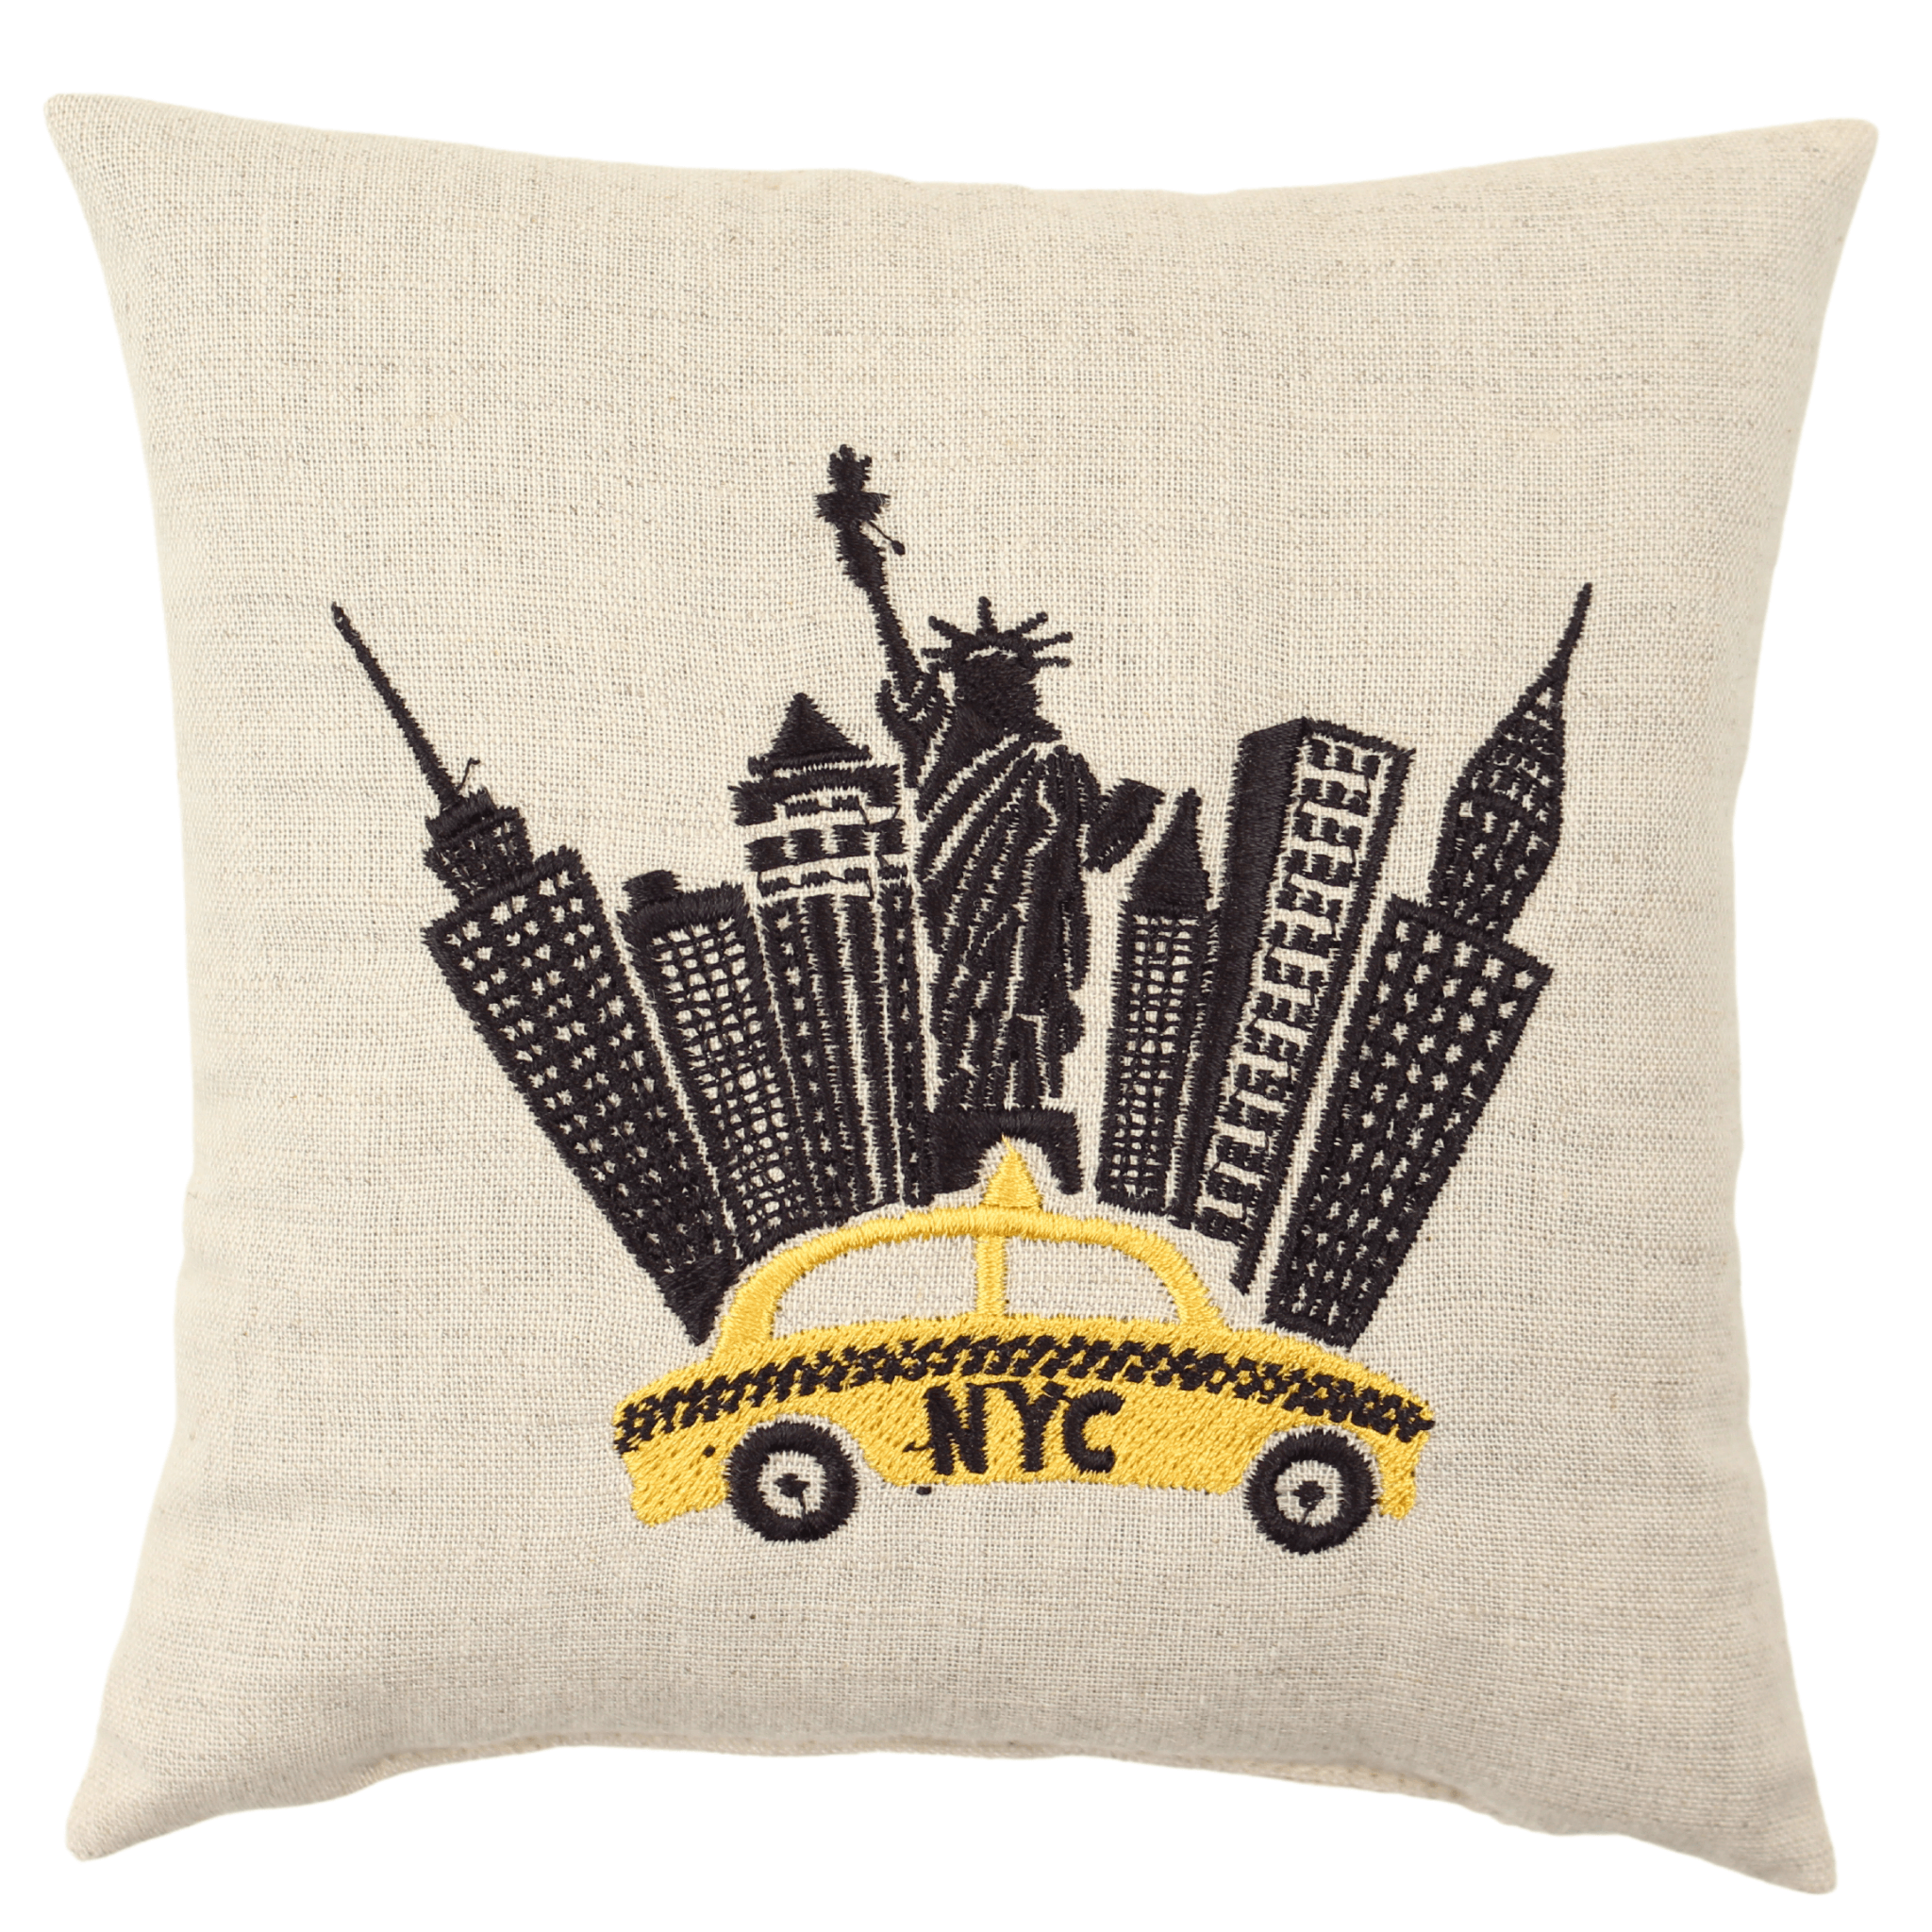 Embroidered New York City Taxi Lavender Filled Sachet - Lavender By The Bay